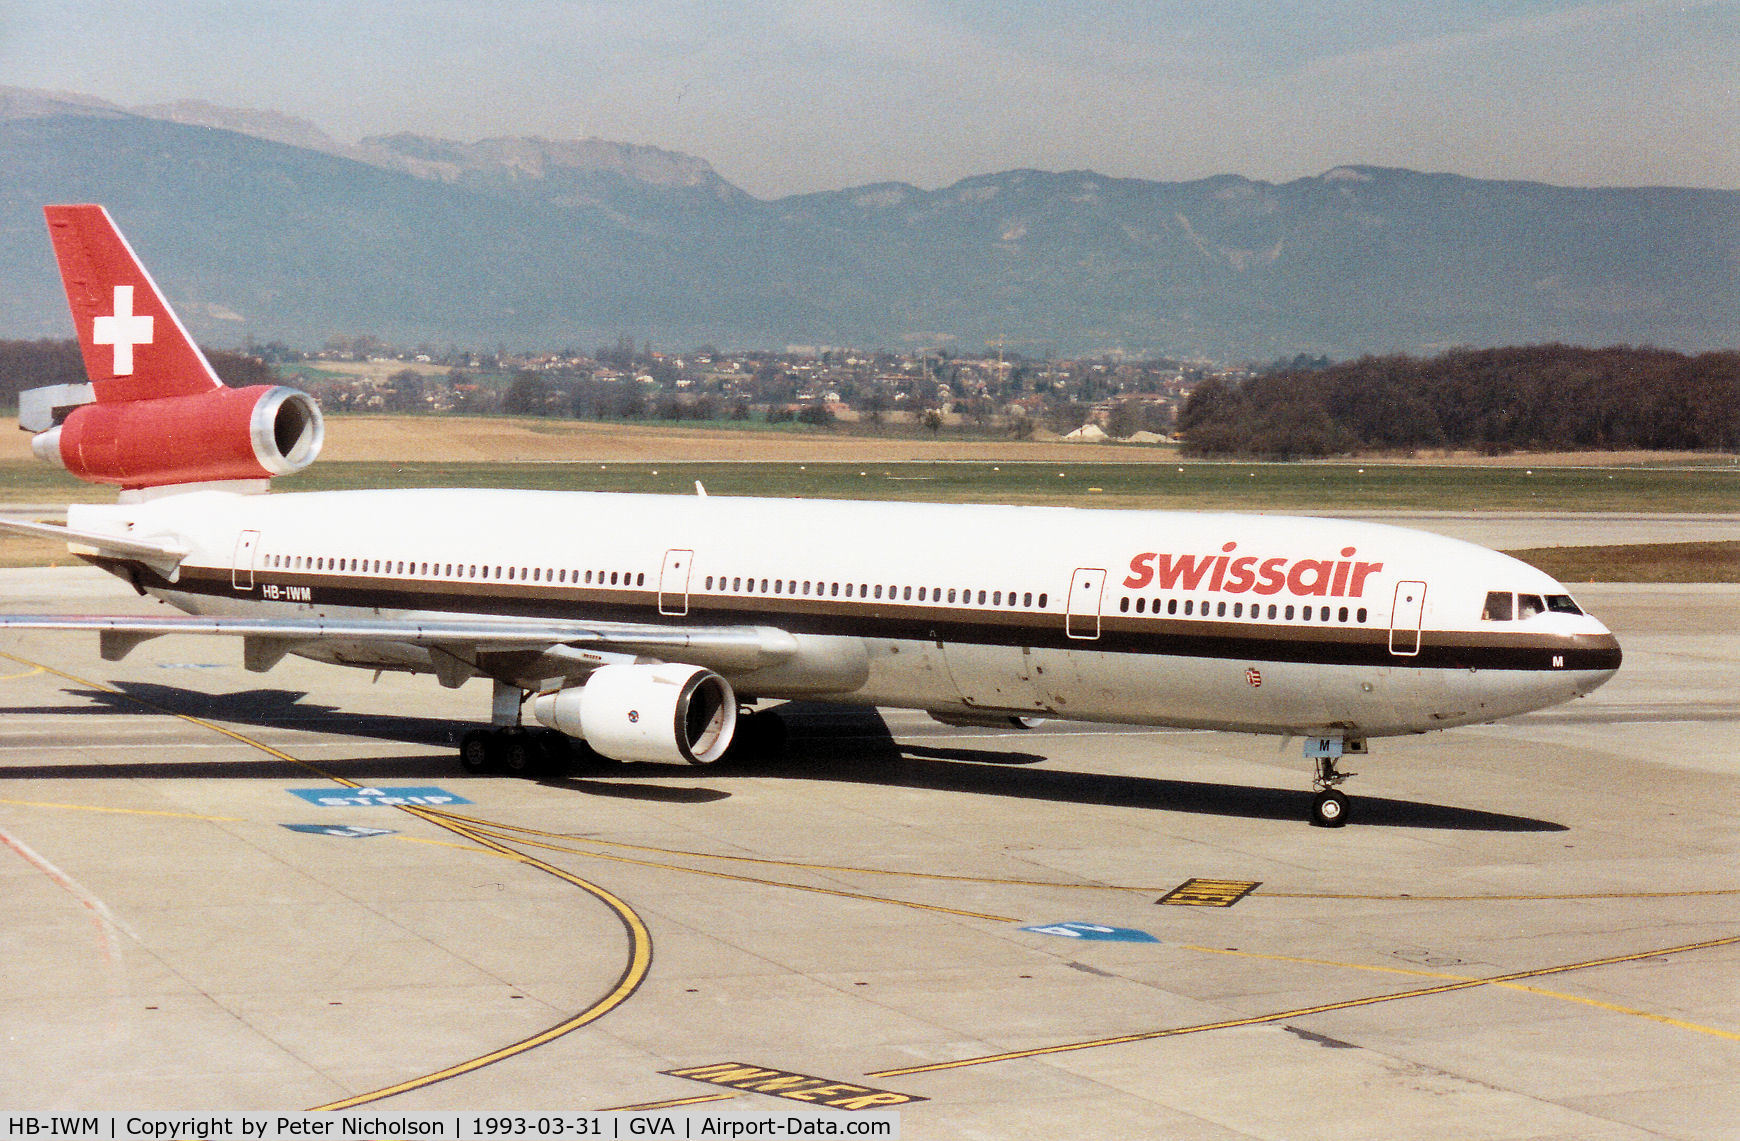 HB-IWM, 1992 McDonnell Douglas MD-11F C/N 48457, MD-11 of Swissair taxying to the terminal at Geneva in March 1993.